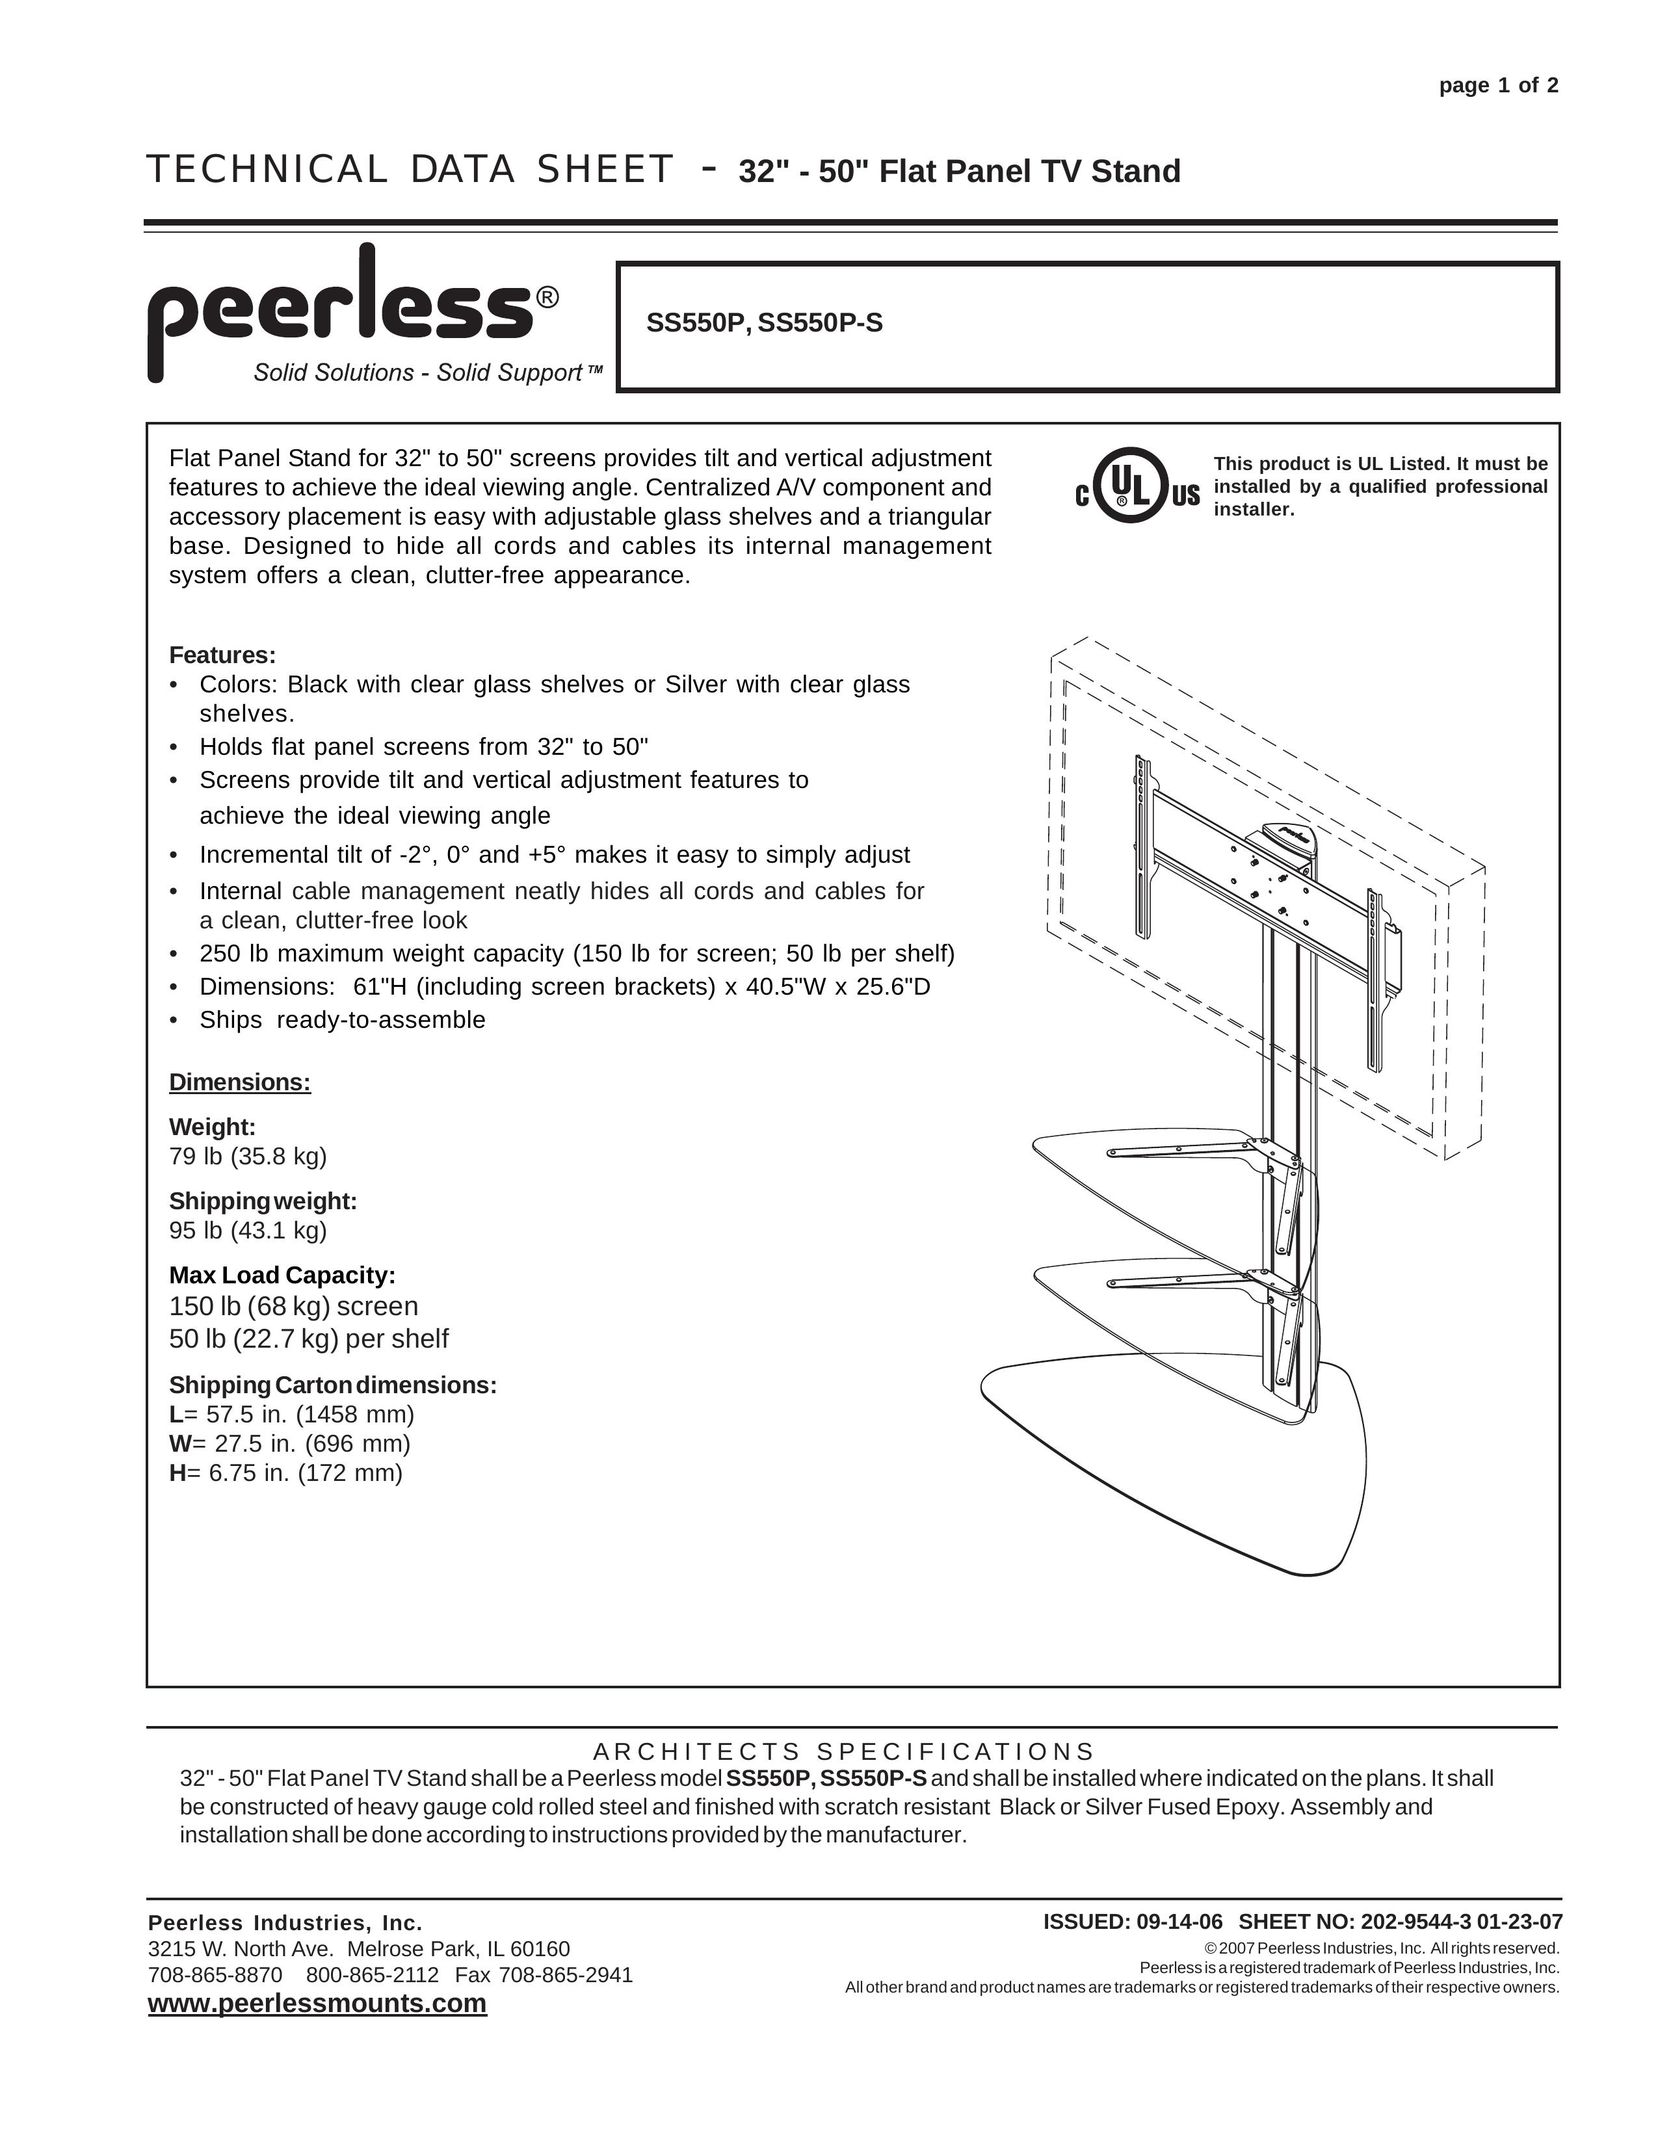 Peerless Maximizer Products SS550P-S TV Video Accessories User Manual